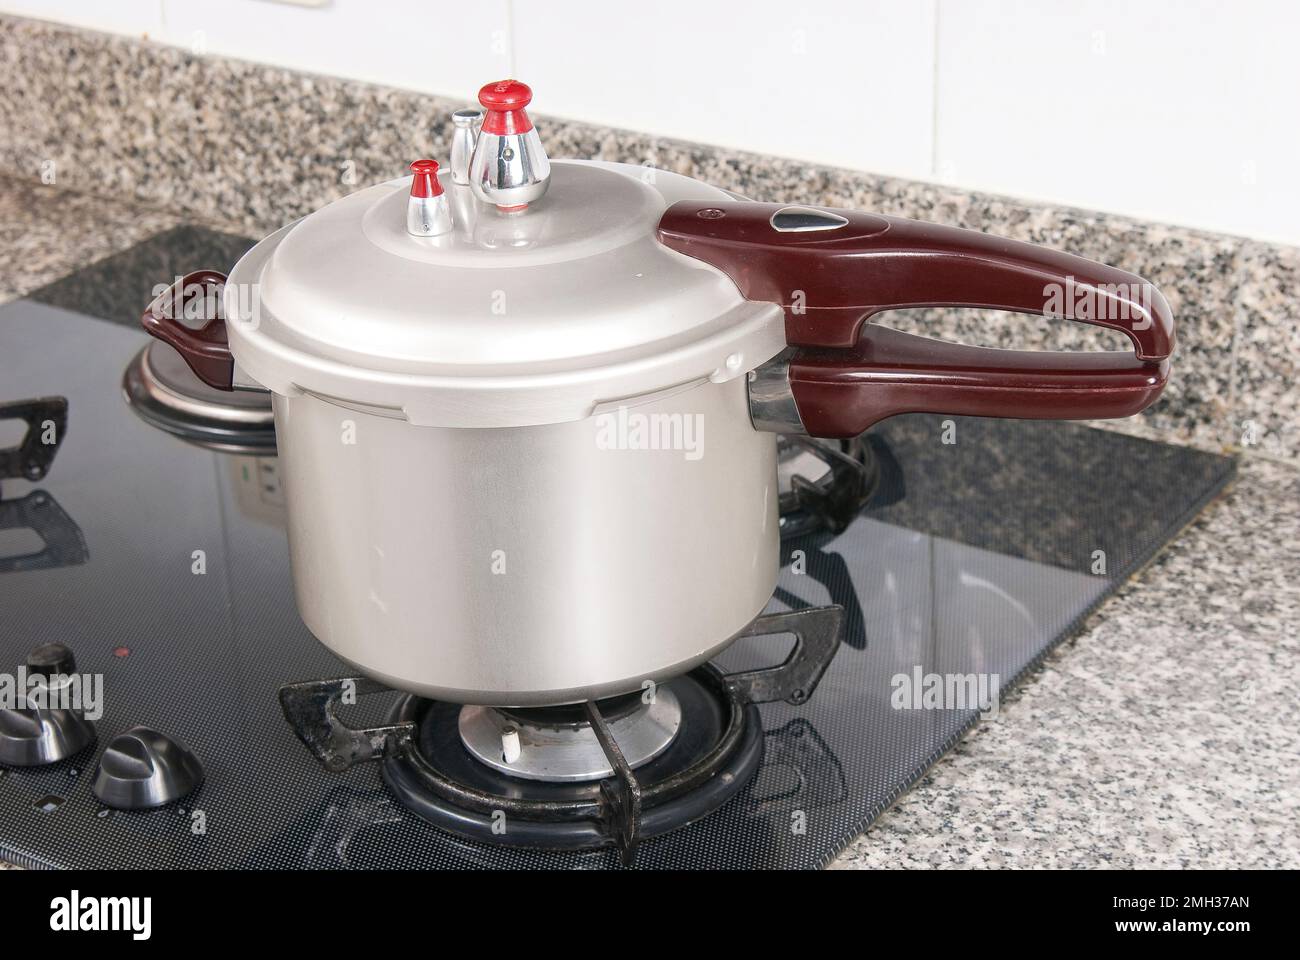 Pressure cooker; photo about stove in the kitchen. Stock Photo